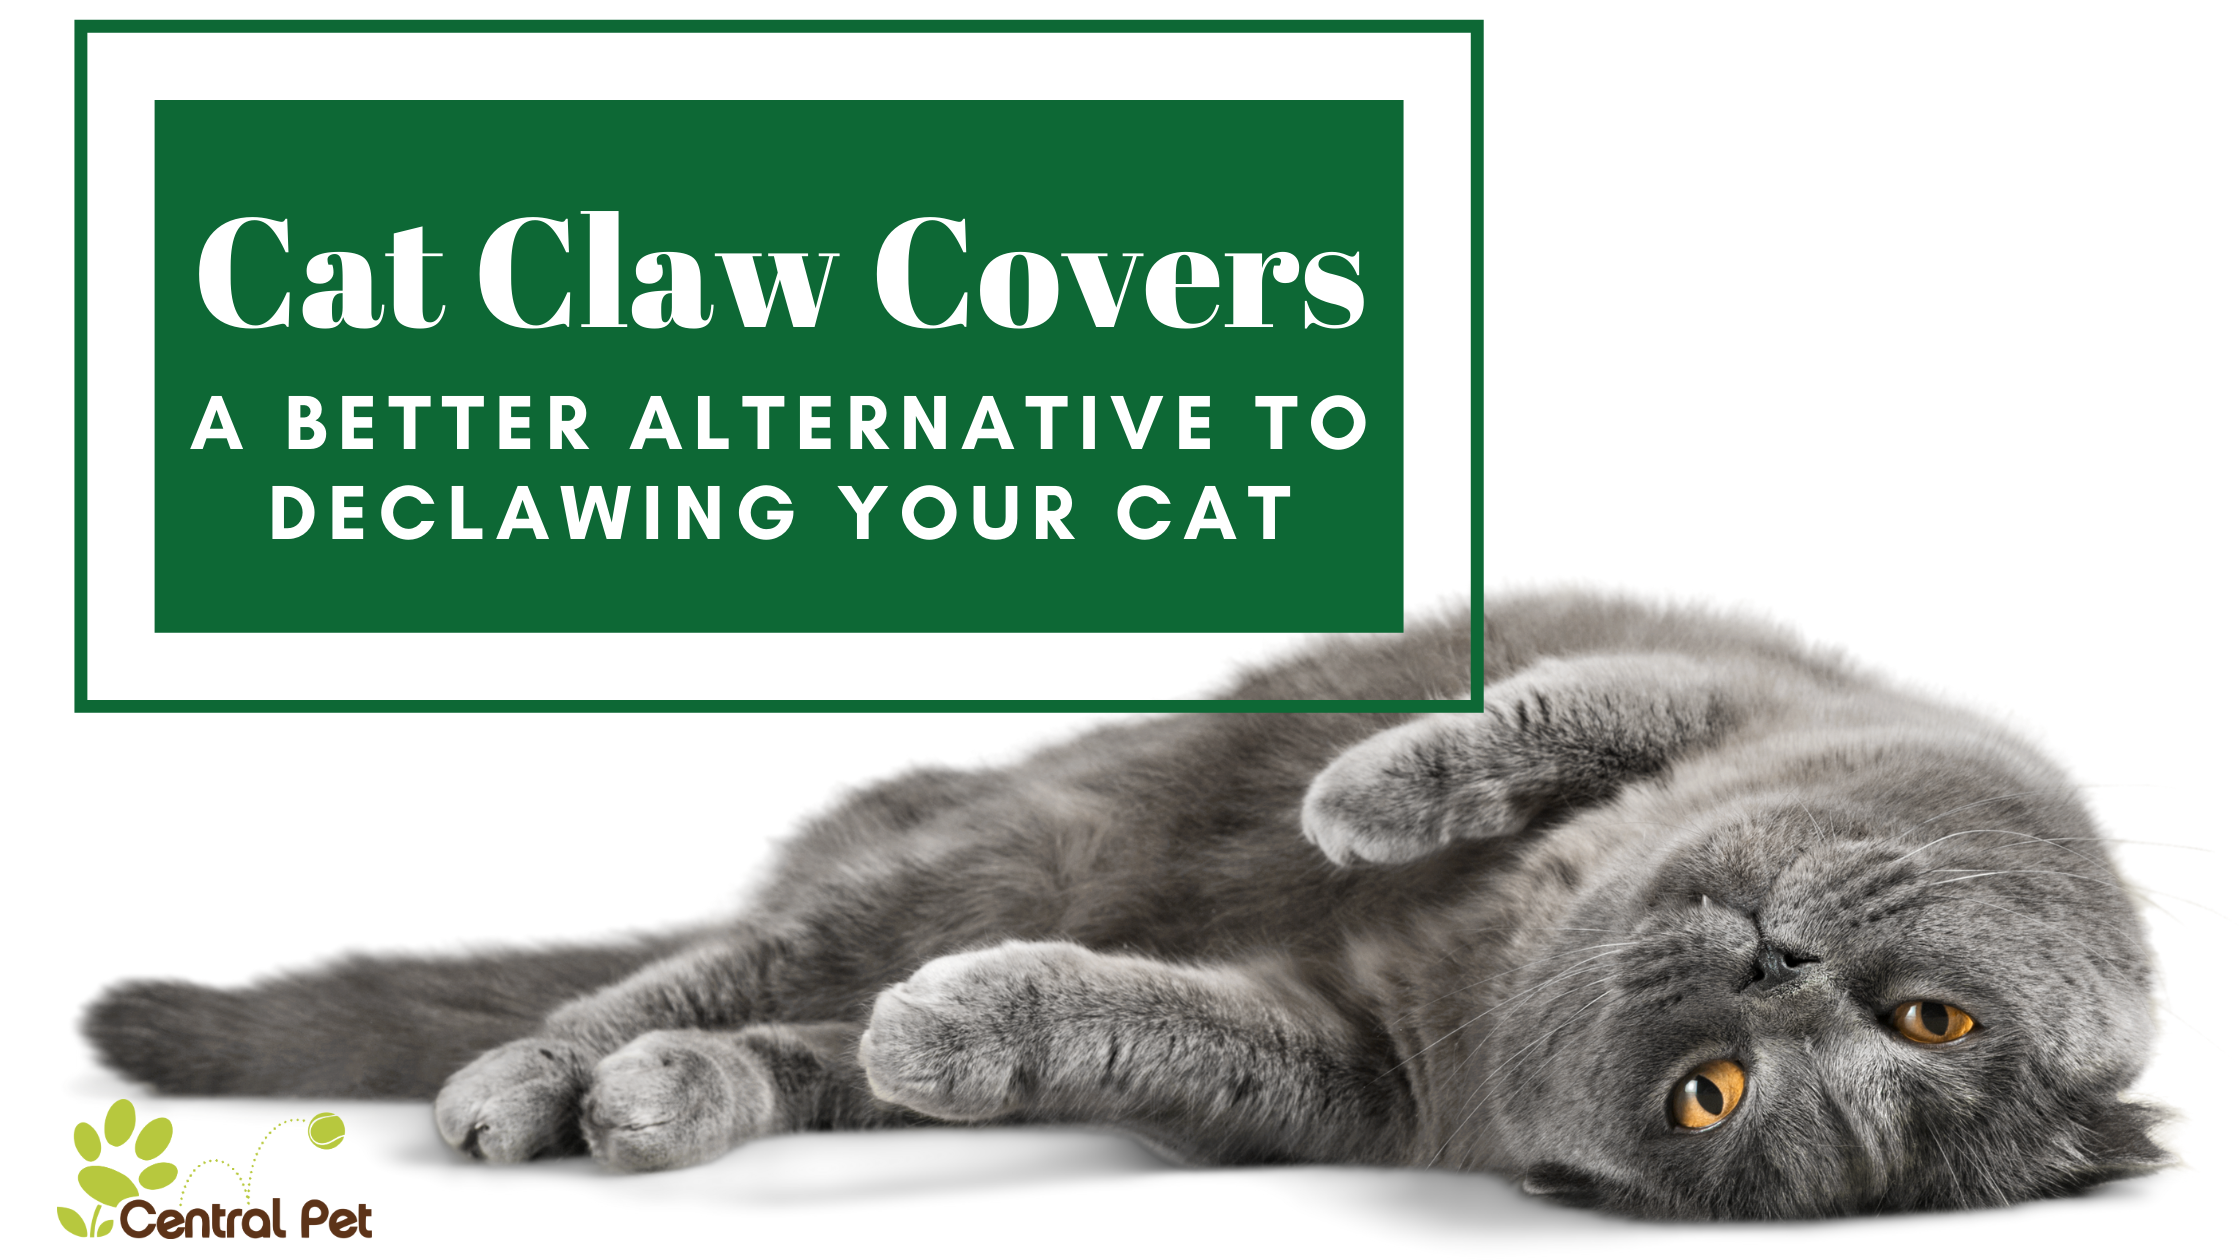 Cat Claw Covers: A Better Alternative To Declawing Your Cat